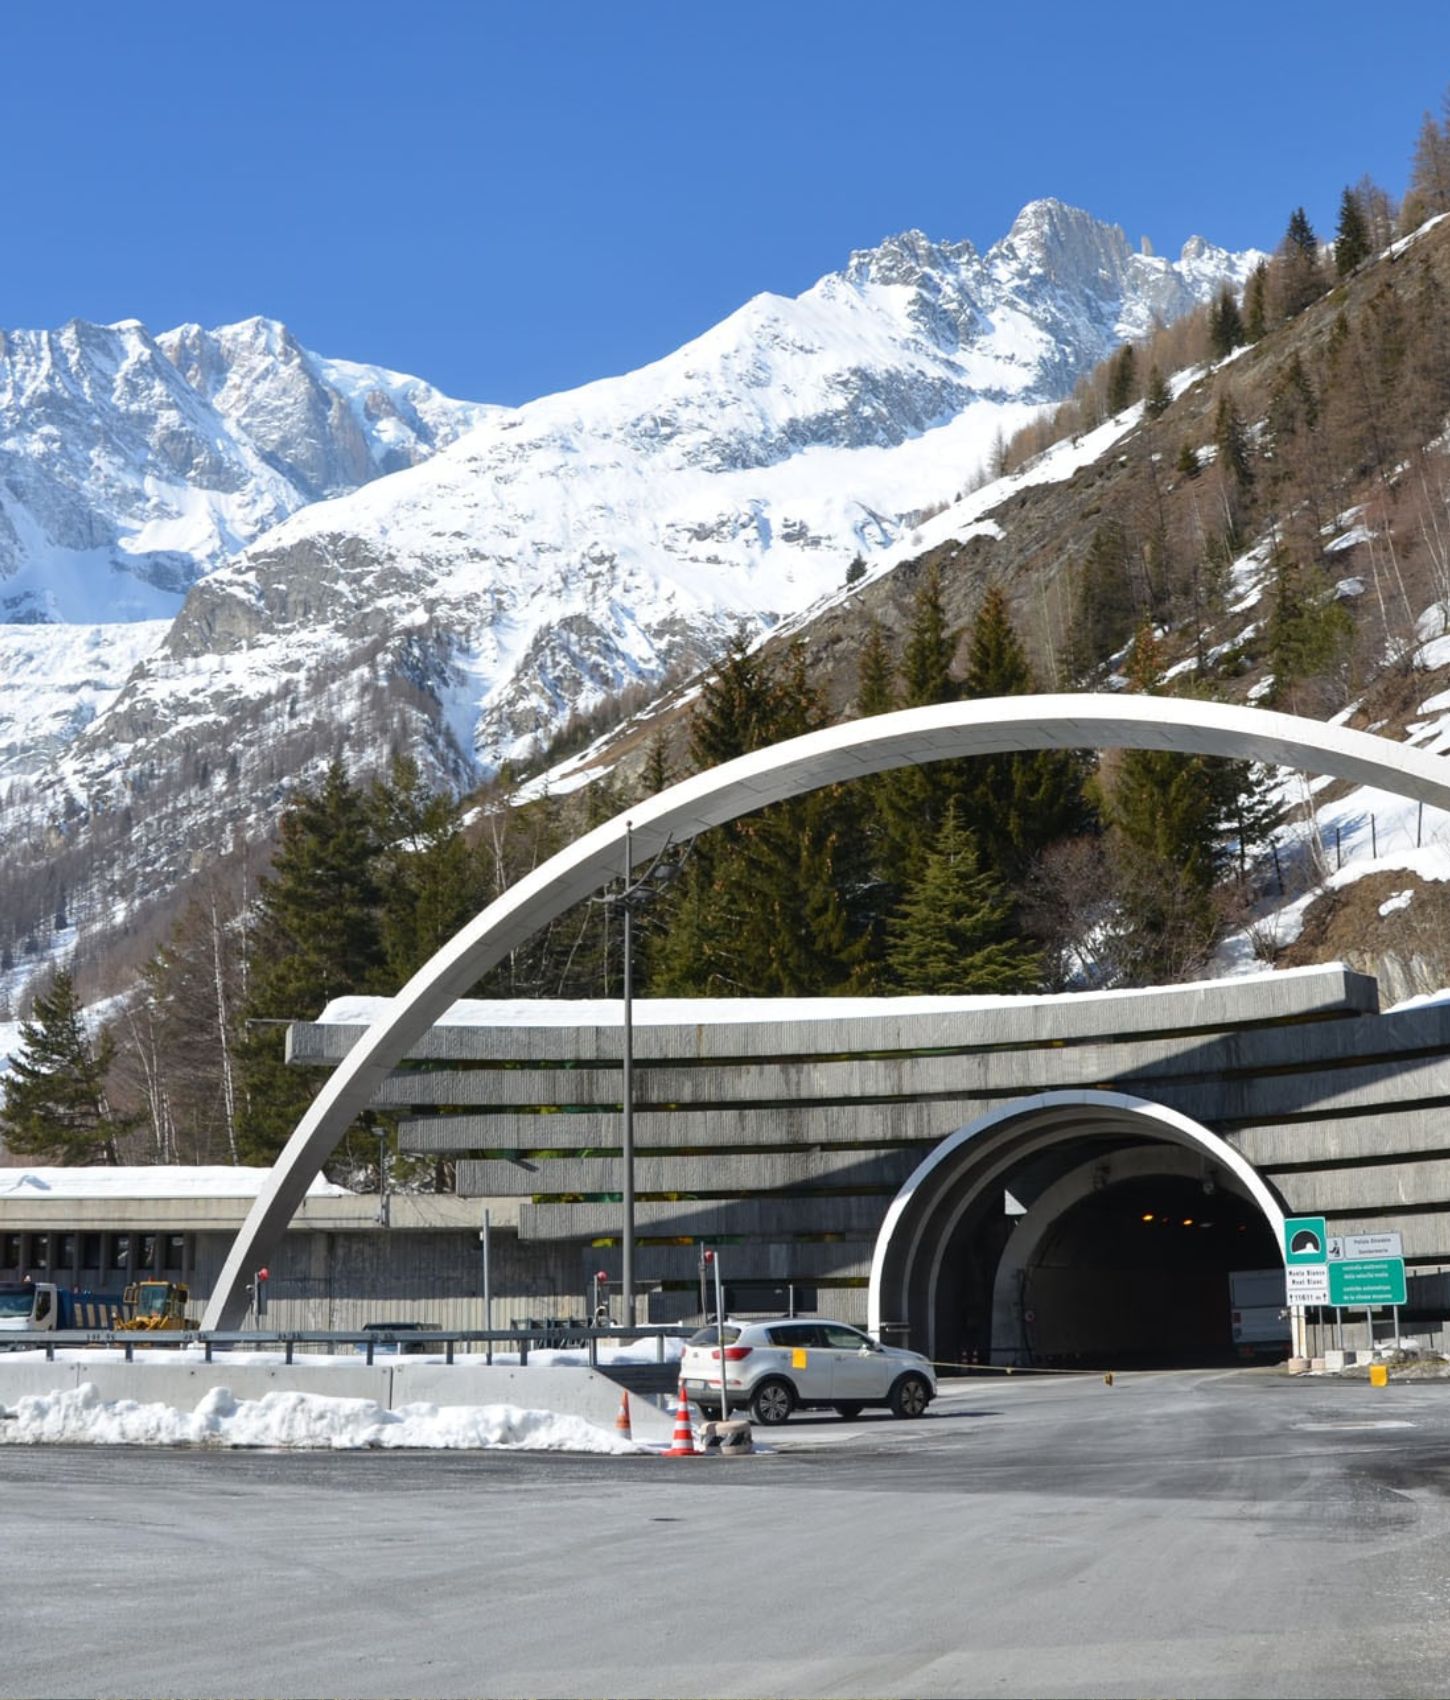 Prohibitions apply in the Mont Blanc Tunnel